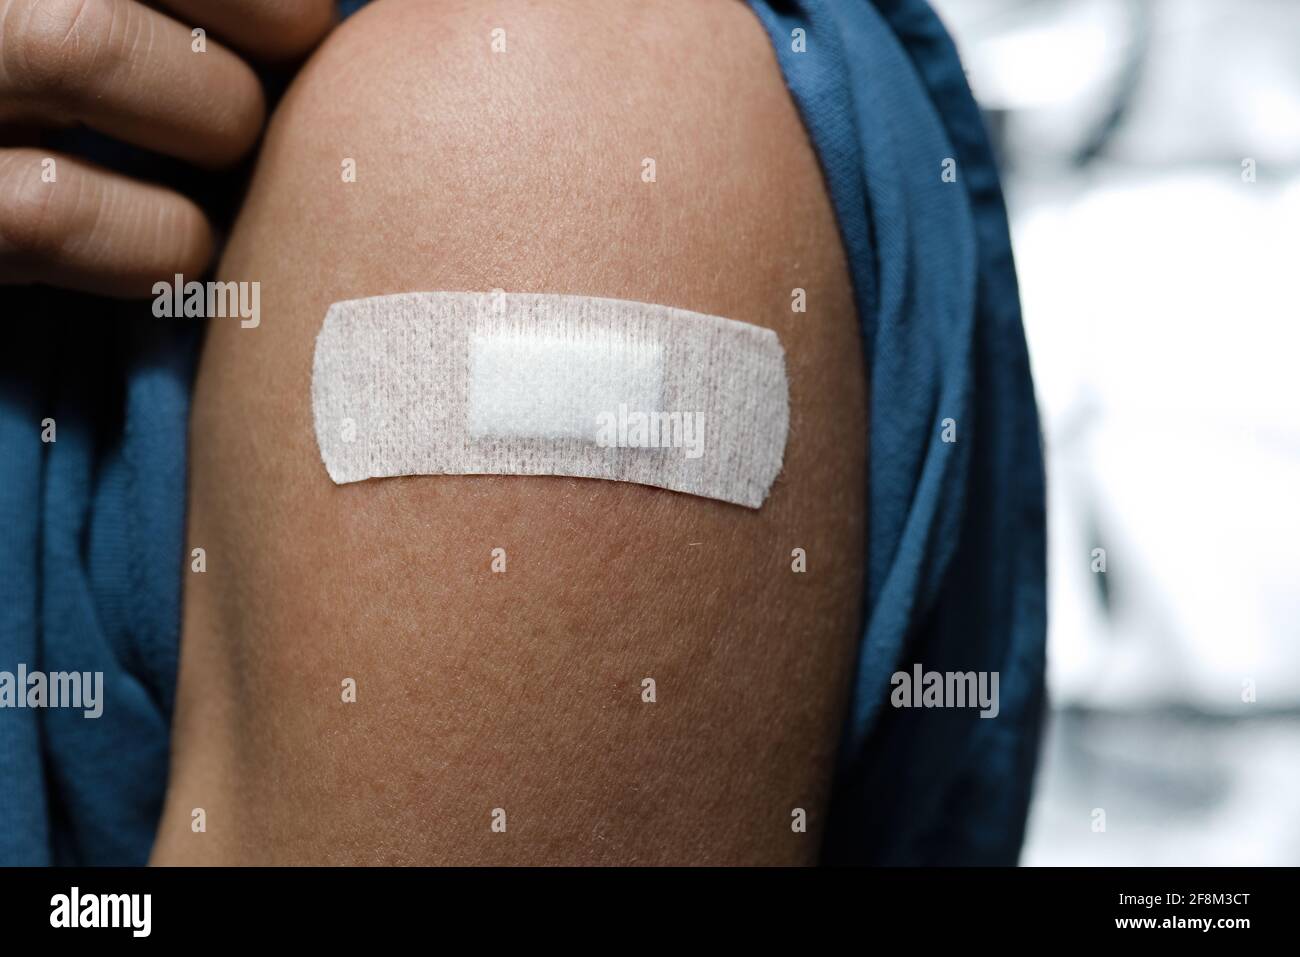 Person with plaster on arm after vaccination inoculation immunization injection date Stock Photo